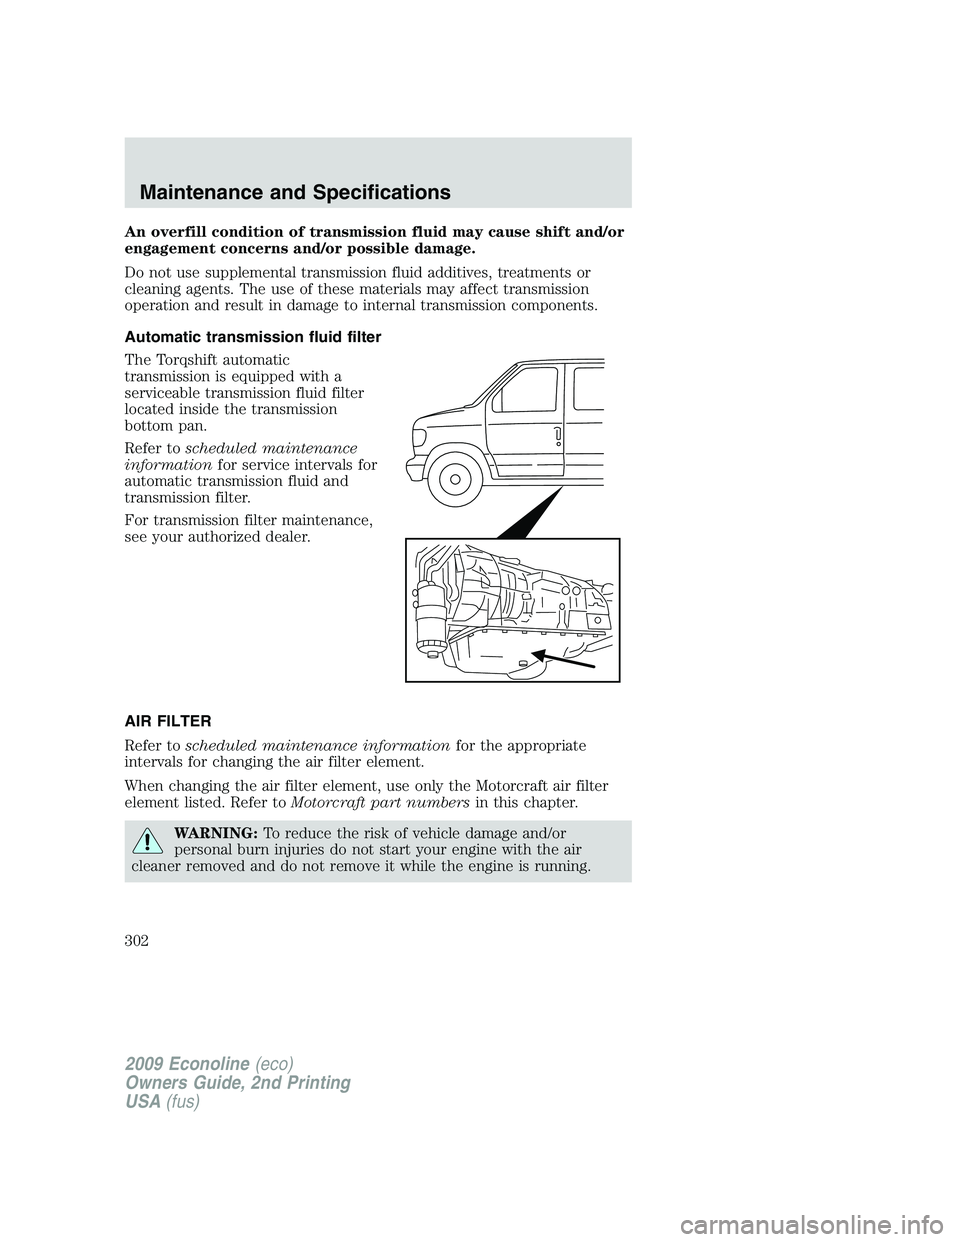 FORD E450 2009  Owners Manual An overfill condition of transmission fluid may cause shift and/or
engagement concerns and/or possible damage.
Do not use supplemental transmission fluid additives, treatments or
cleaning agents. The 